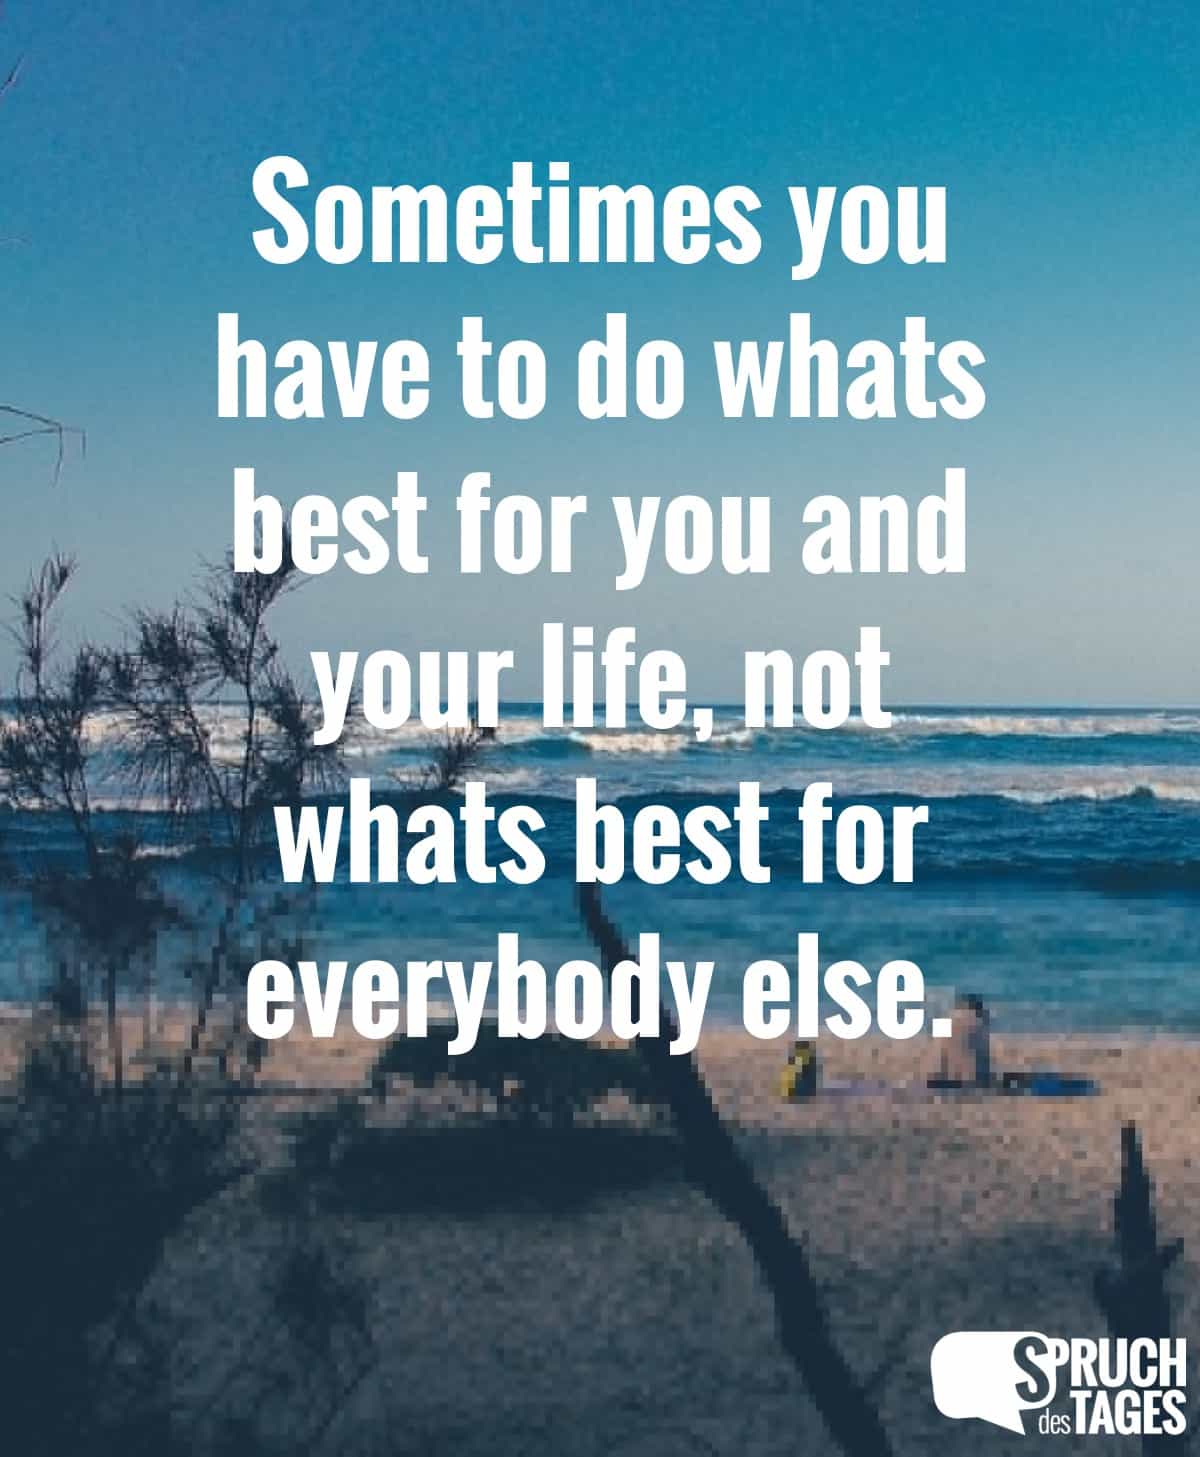 Sometimes you have to do whats best for you and your life, not whats best for everybody else.